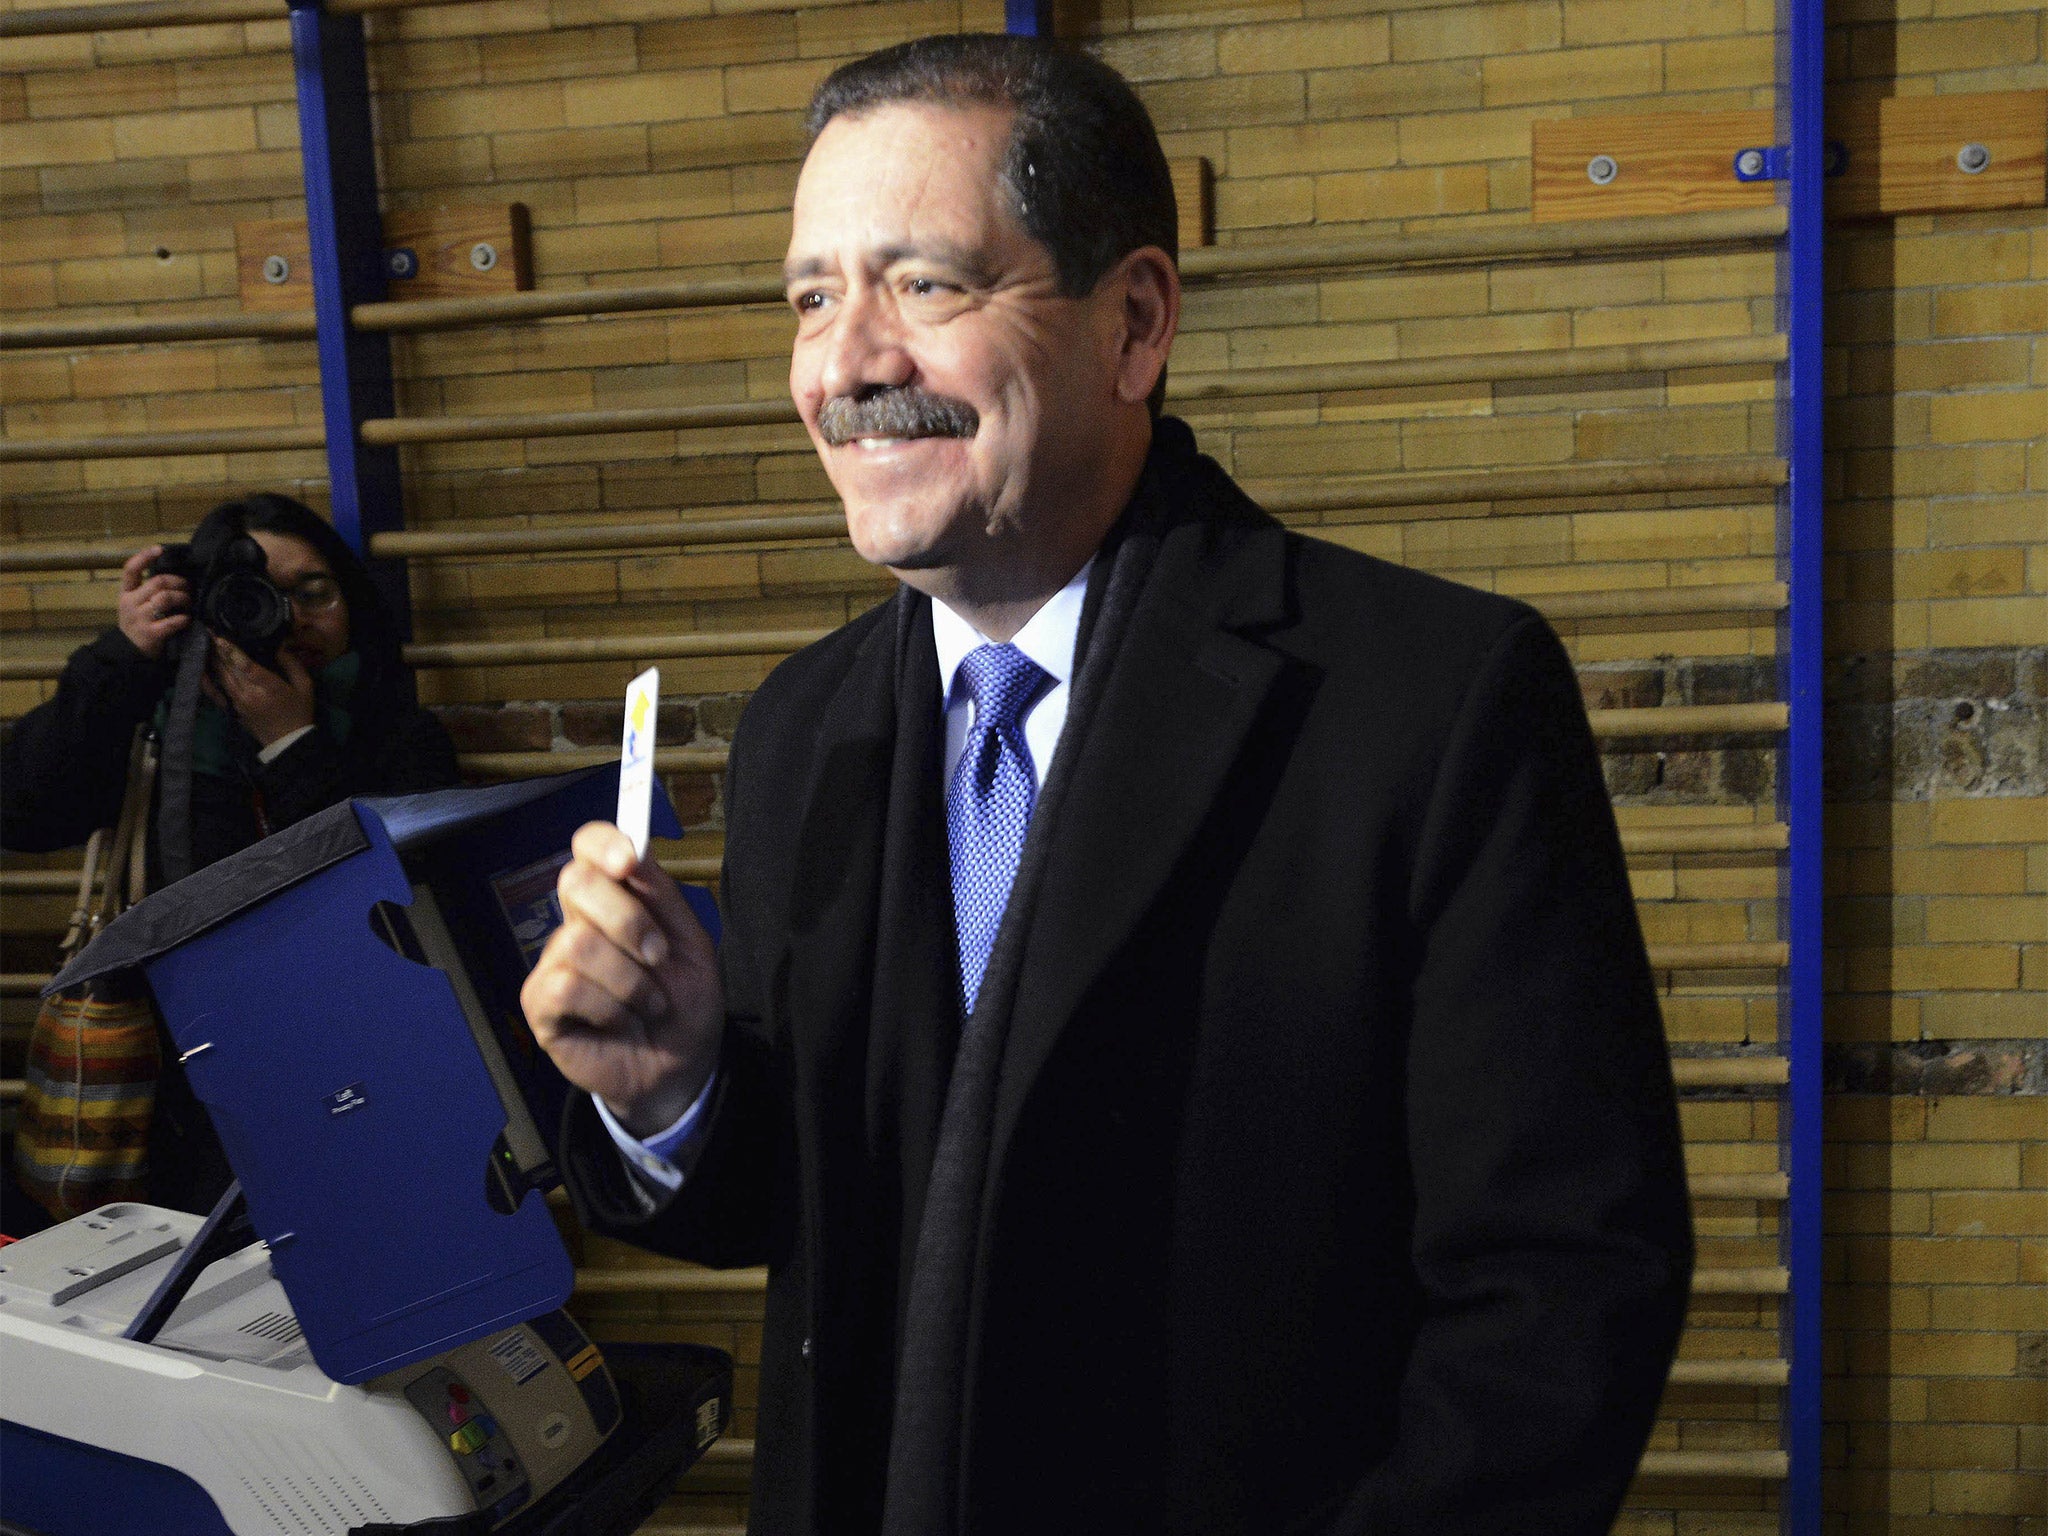 Chicago mayoral candidate, Jesus Garcia, smiles as he holds his electronic card after voting on Tuesday